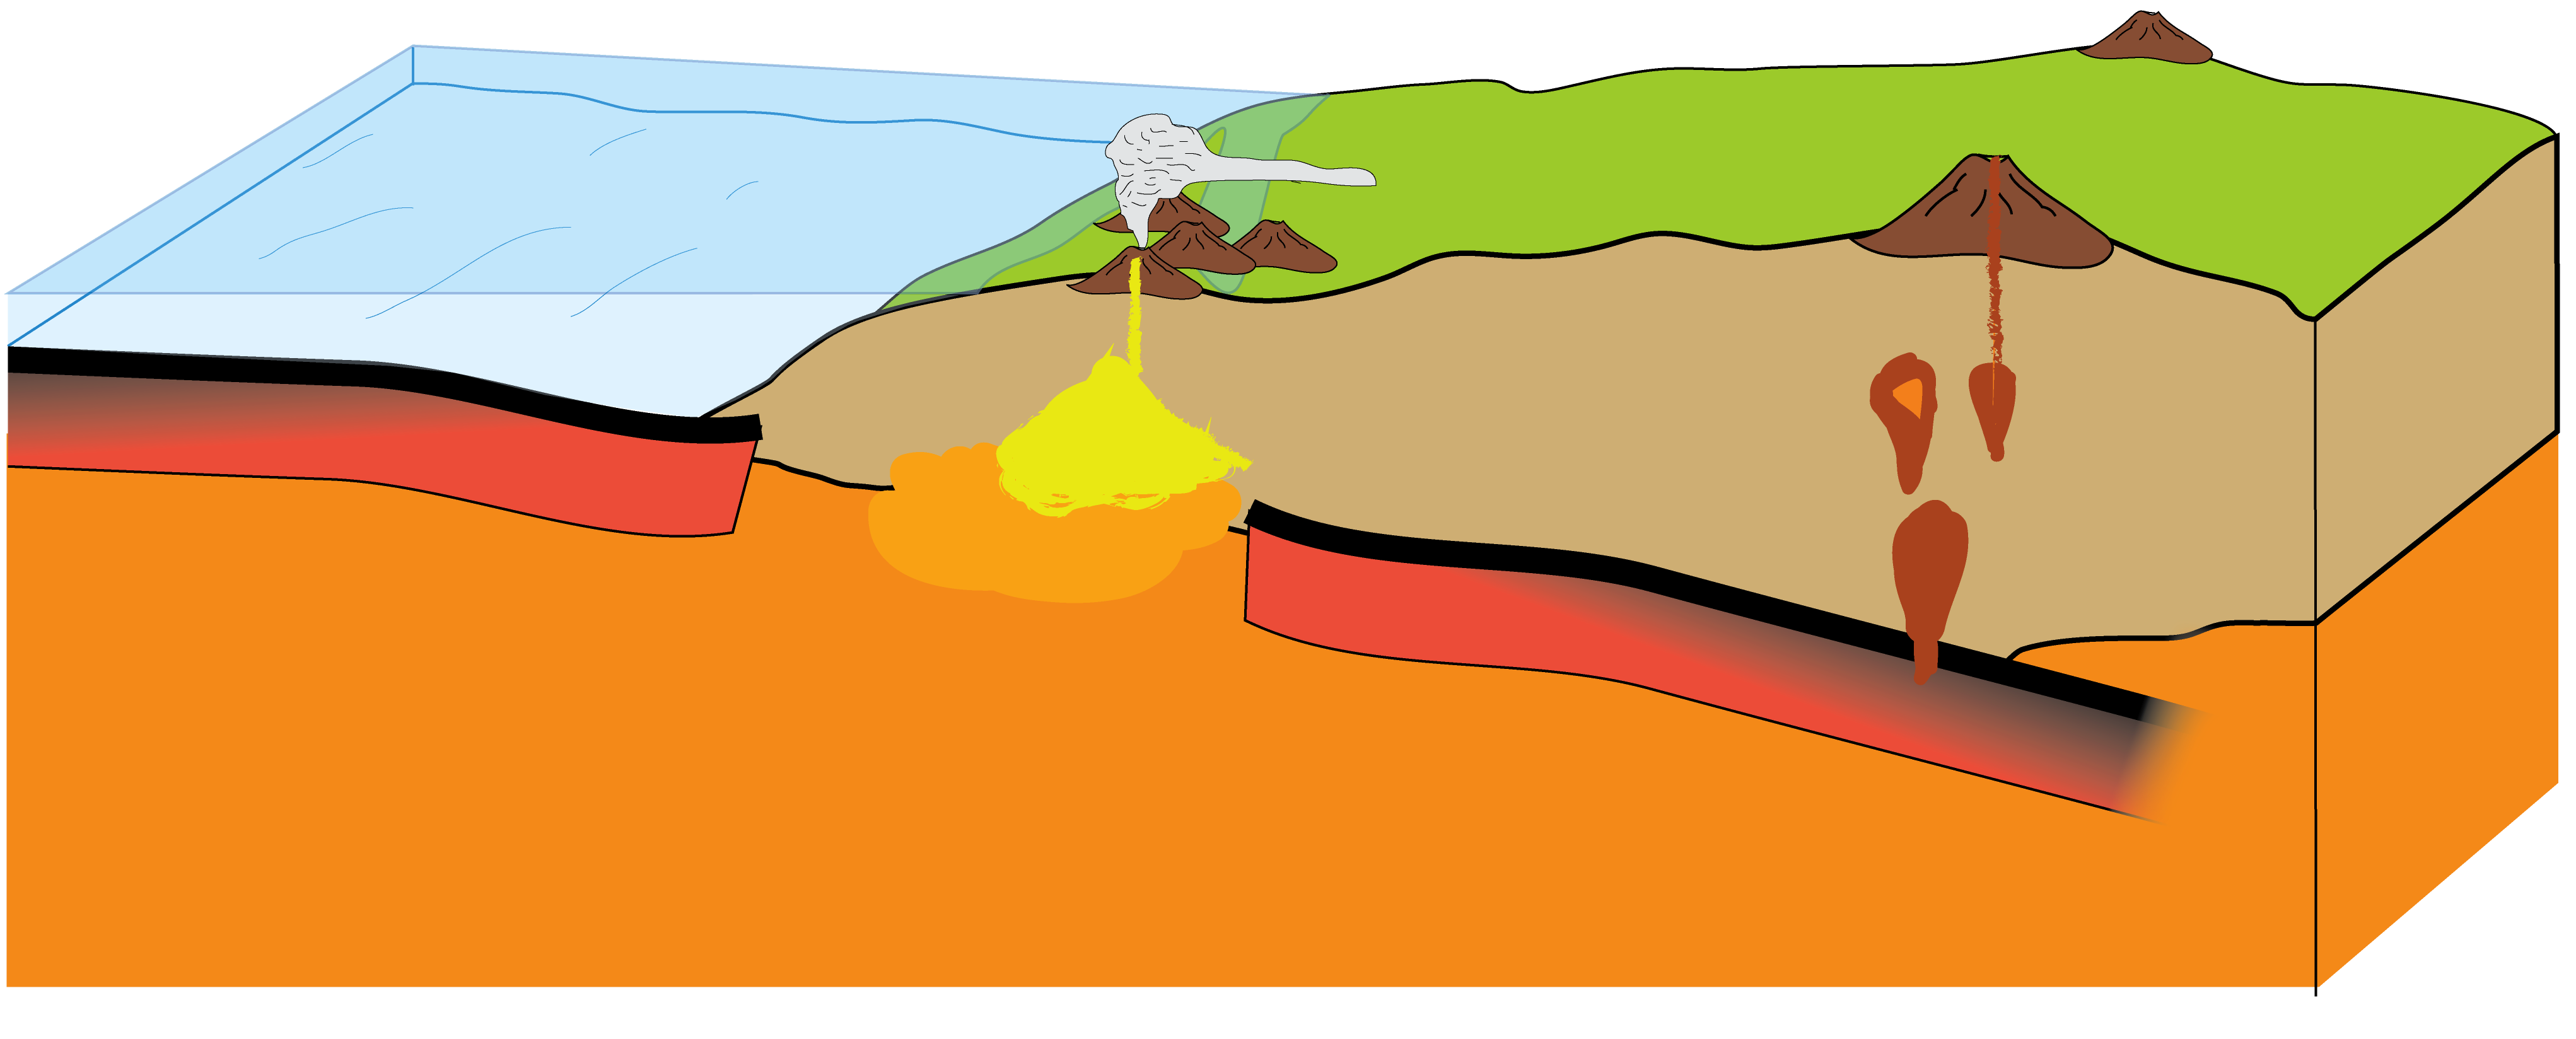 The spreading ridge is subducted beneath the continental plate.